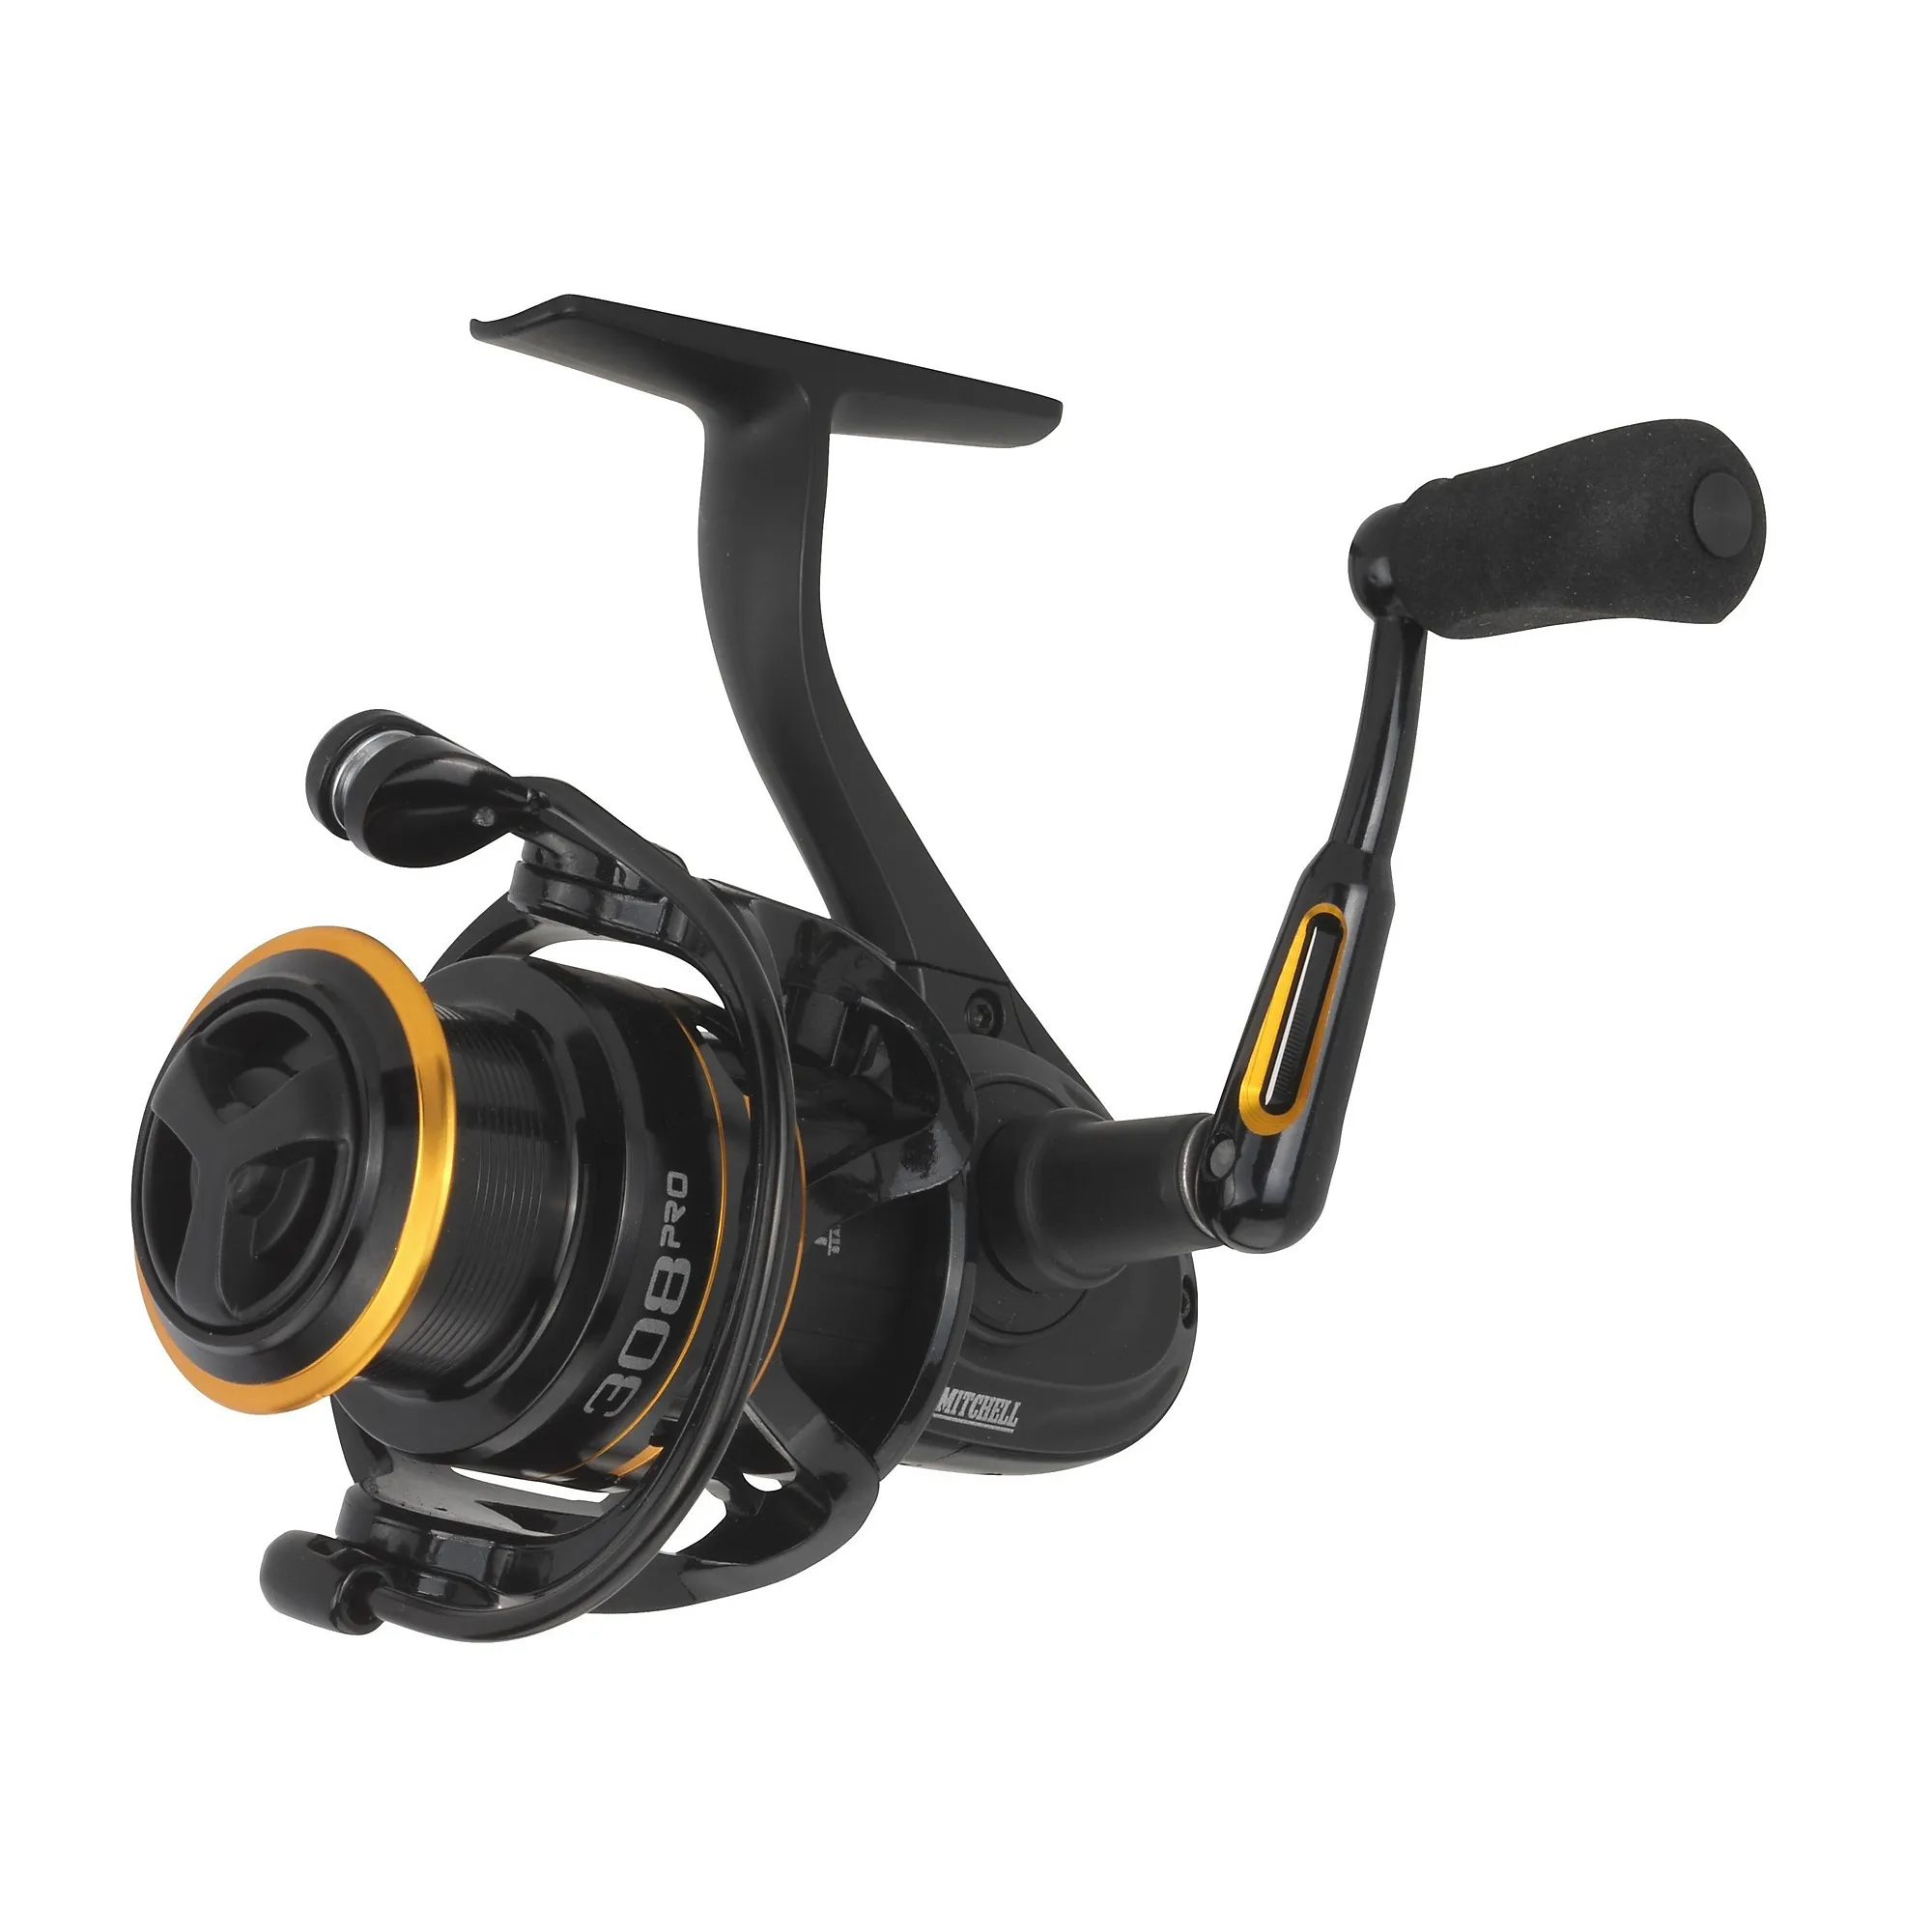 Mitchell® 300 Pro Series Spinning Reel